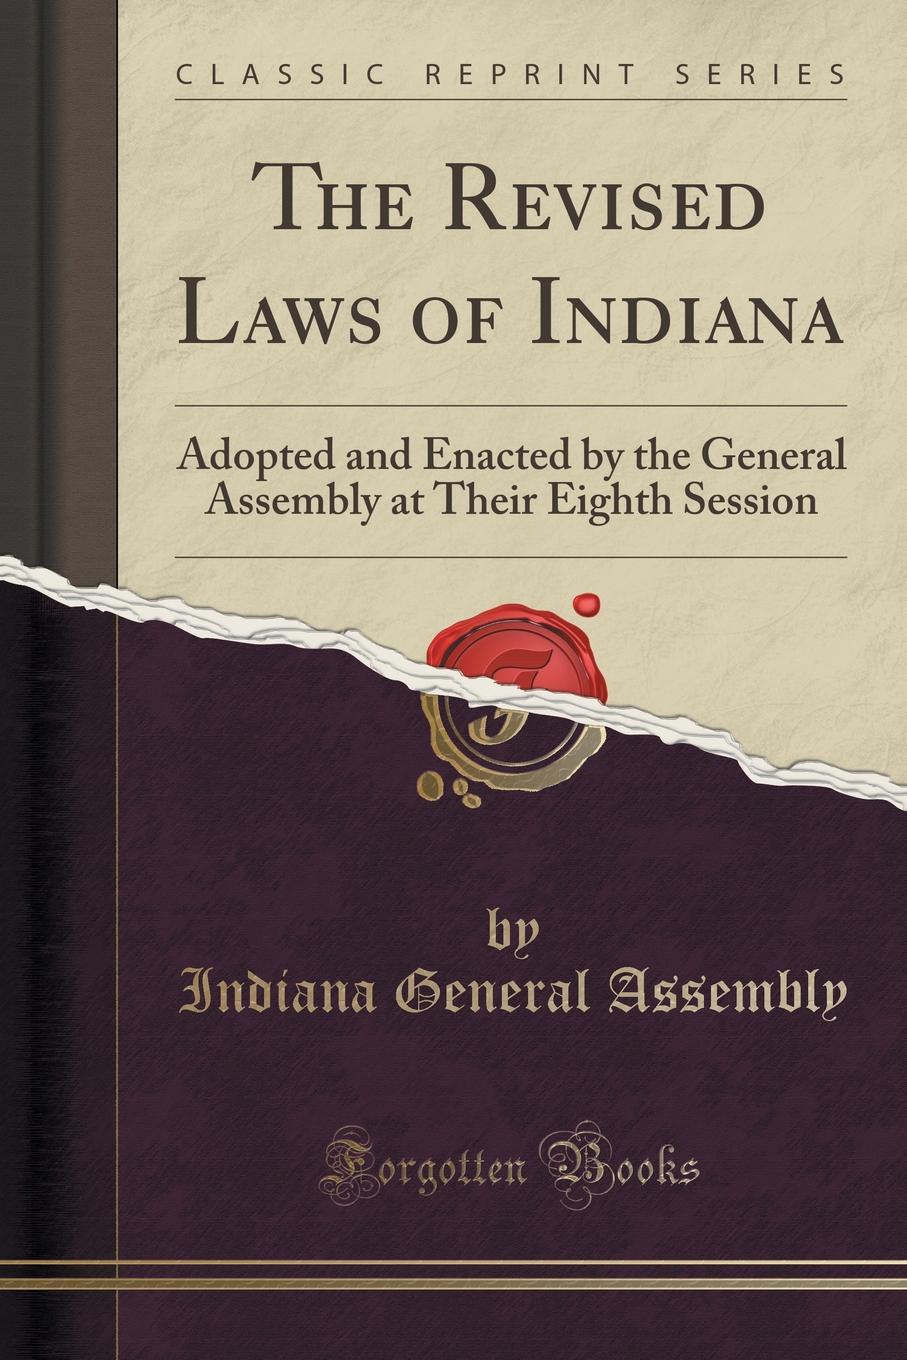 Buy The Revised Laws Of Indiana Online ₹1143 from ShopClues